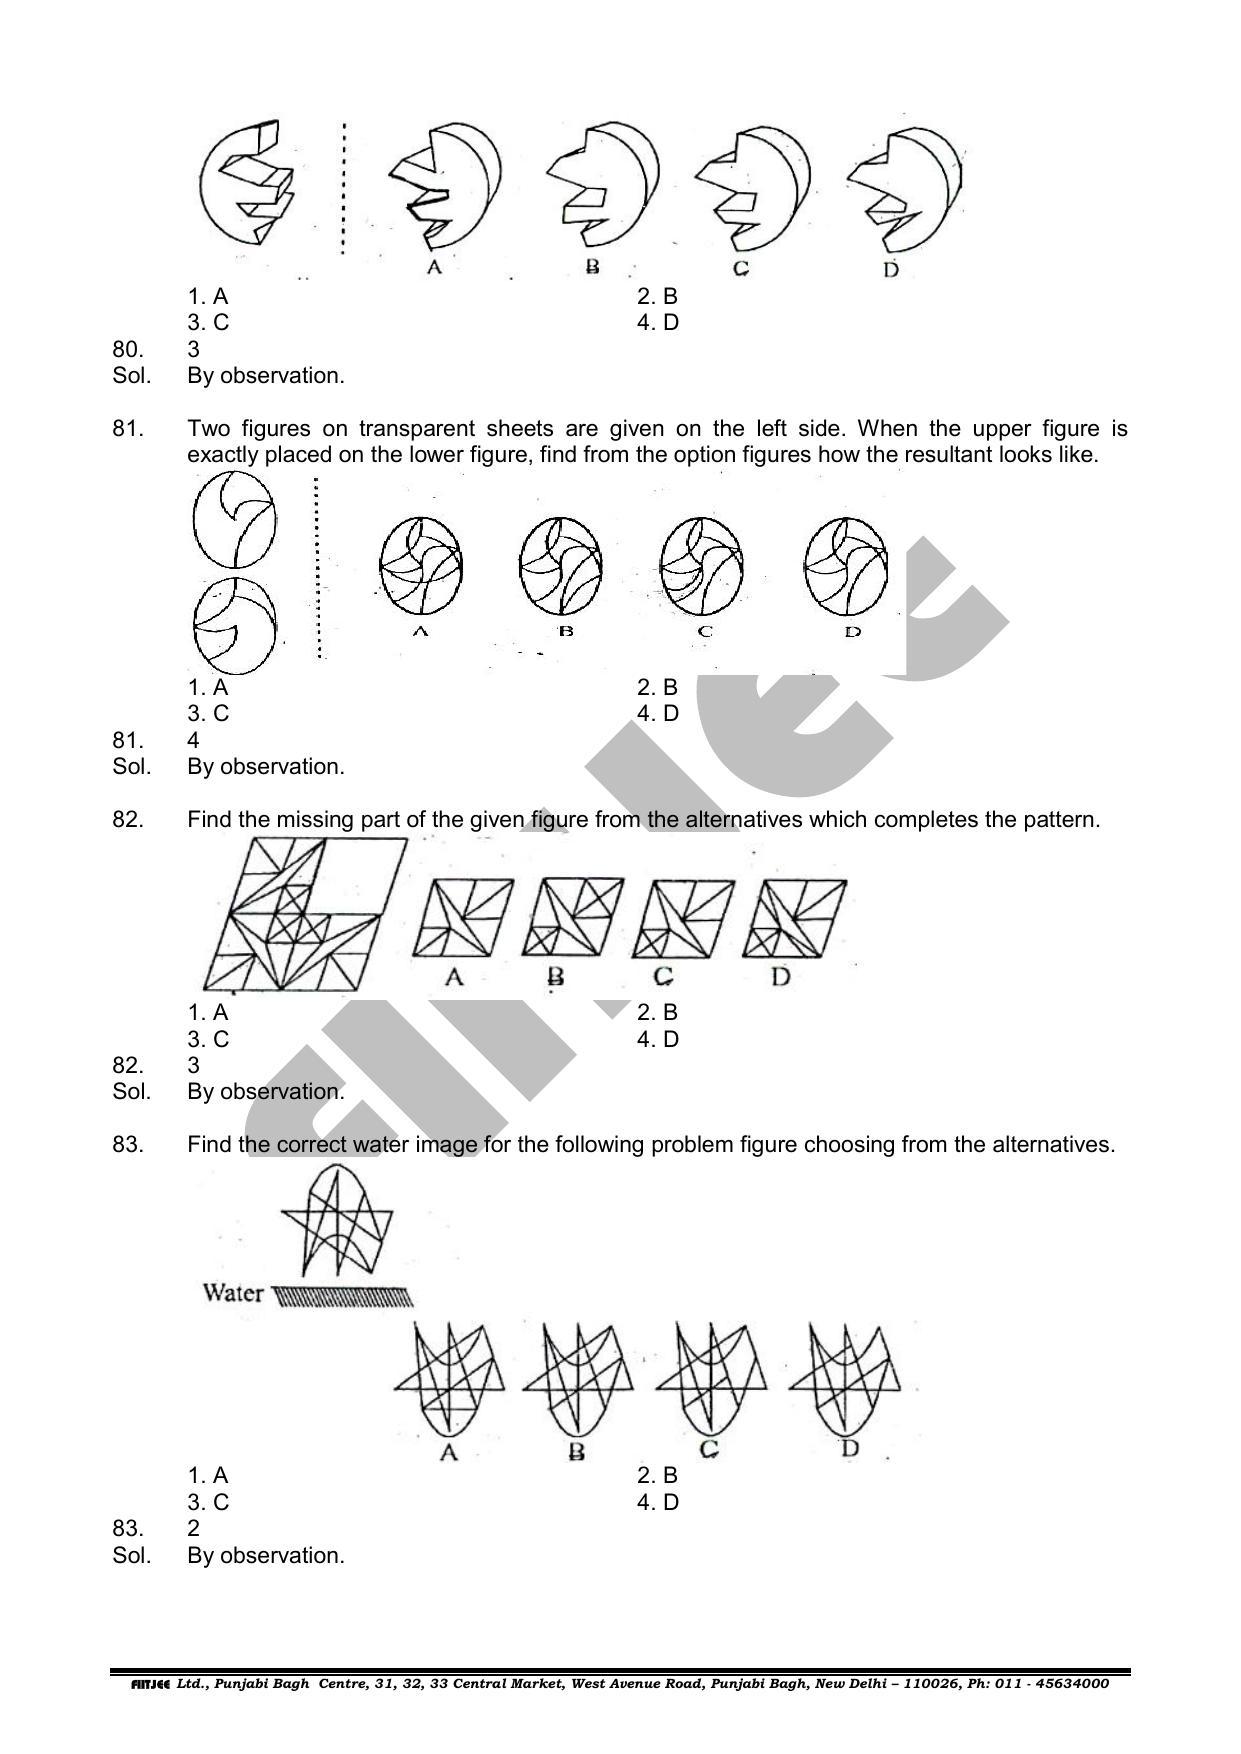 NTSE 2019 (Stage II) MAT Question Paper with Solution (June 16, 2019) - Page 26